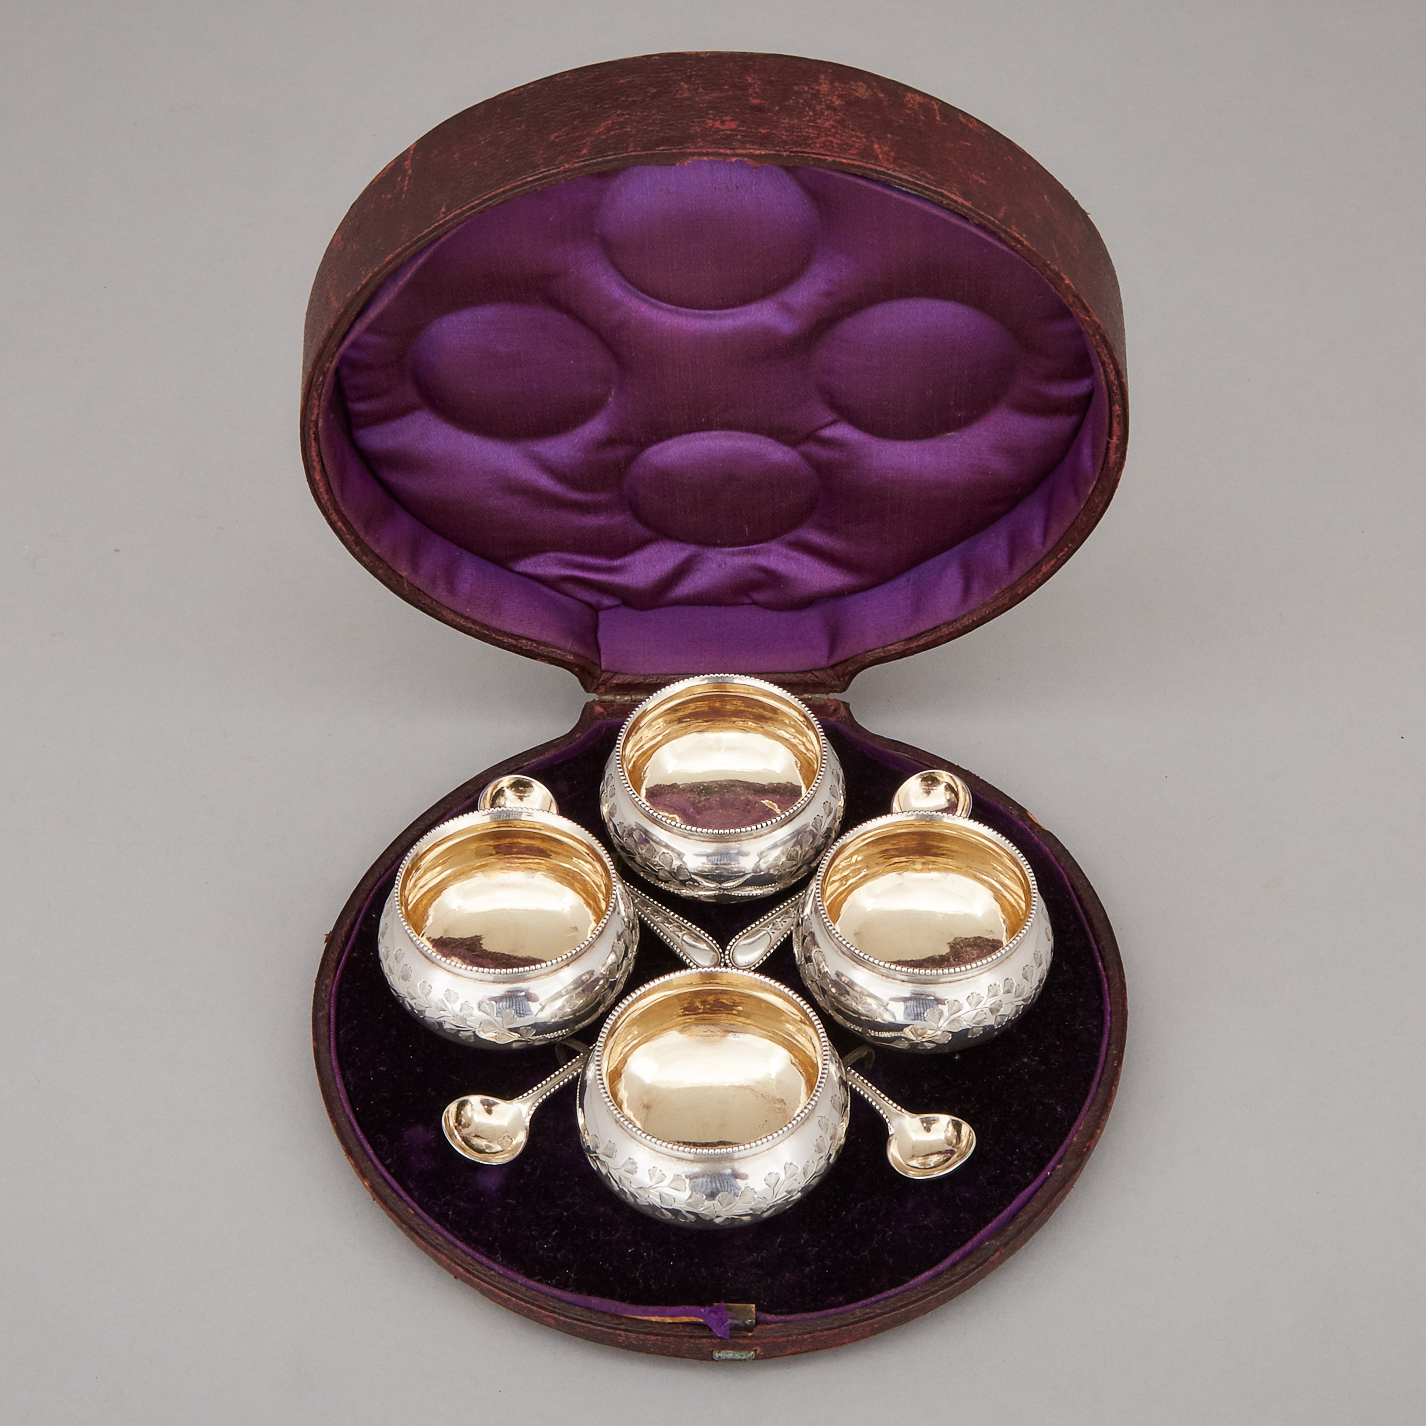 Set of Four Victorian Silver Salt Cellars with Spoons, Henry John Lias & Son, London, 1875